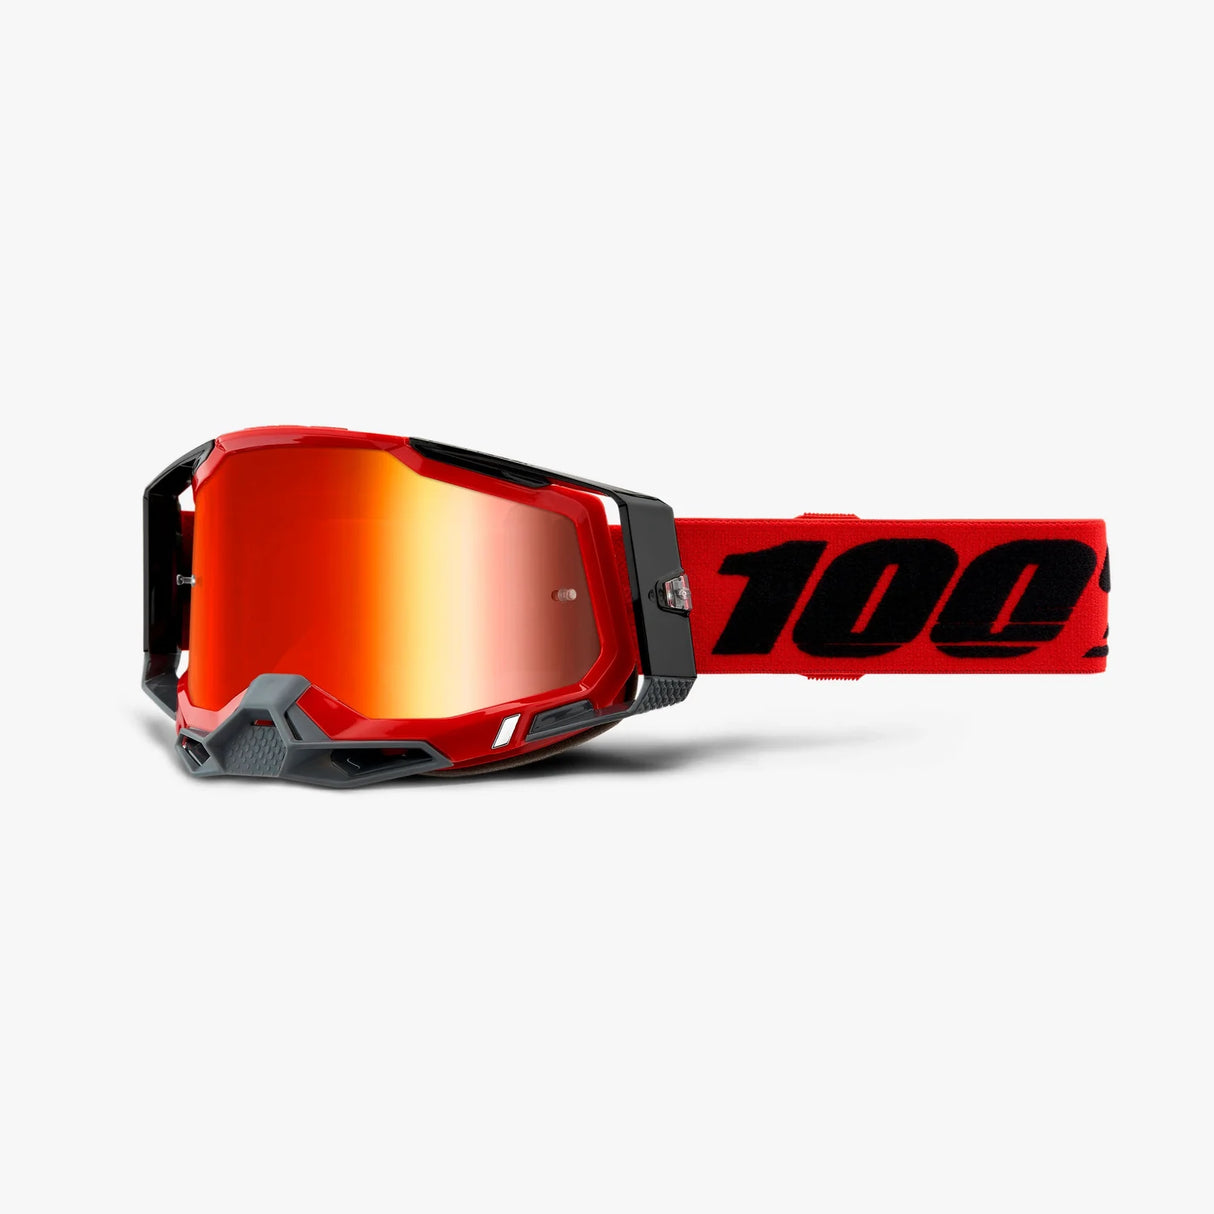 RACECRAFT 2 GOGGLE RED (MIRROR RED LENS)